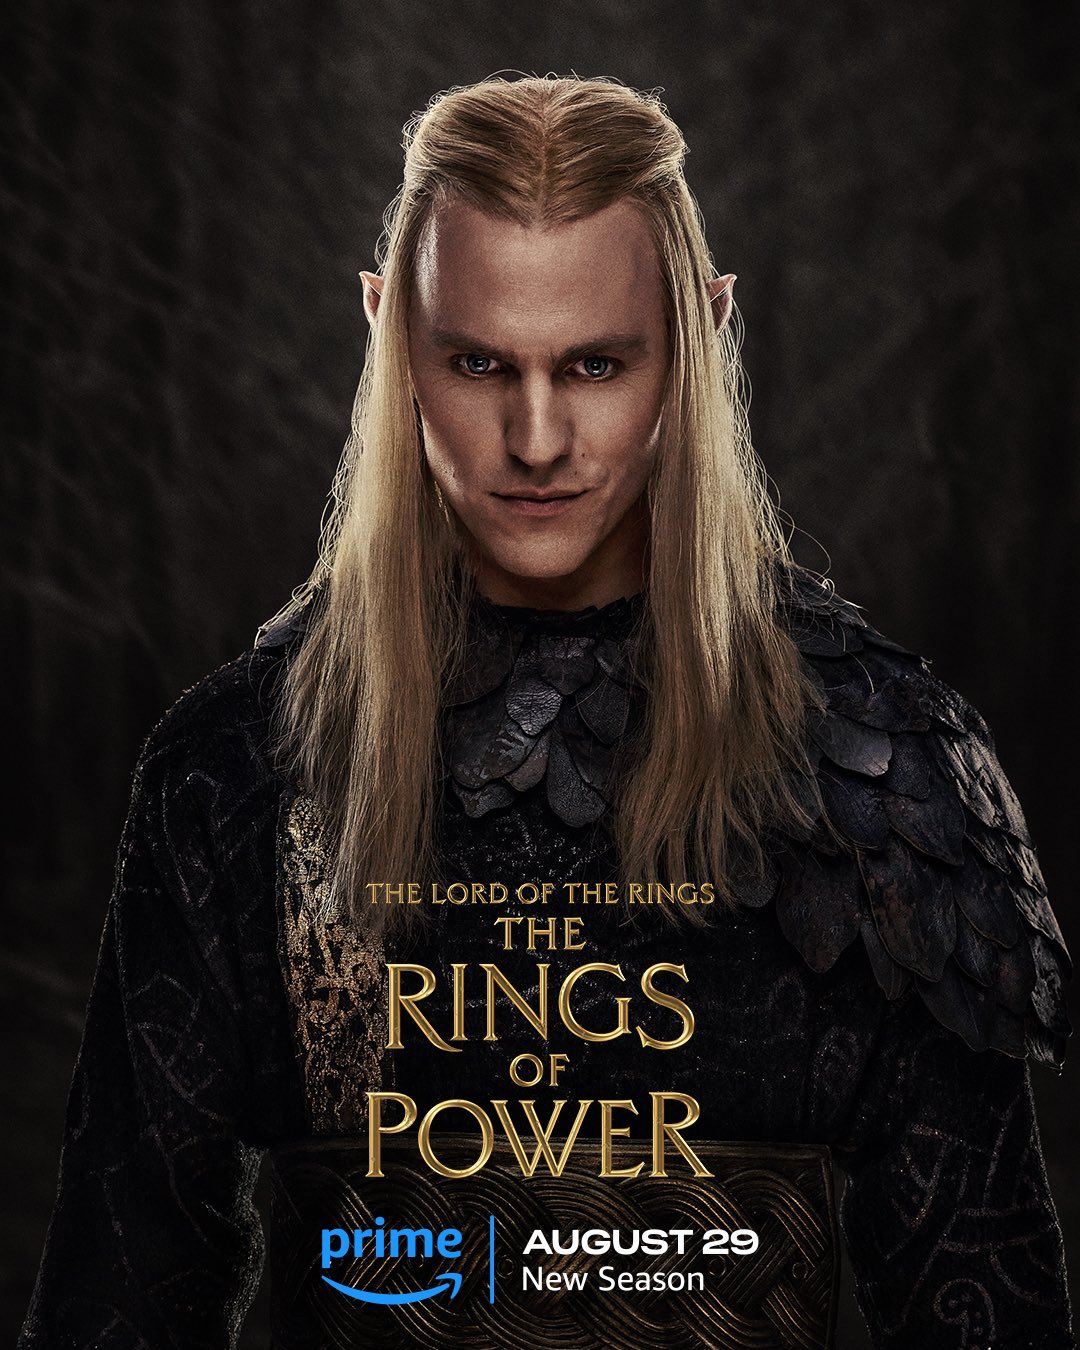 Властелин колец. Кольца власти
The Lord of the Rings: The Rings of Power